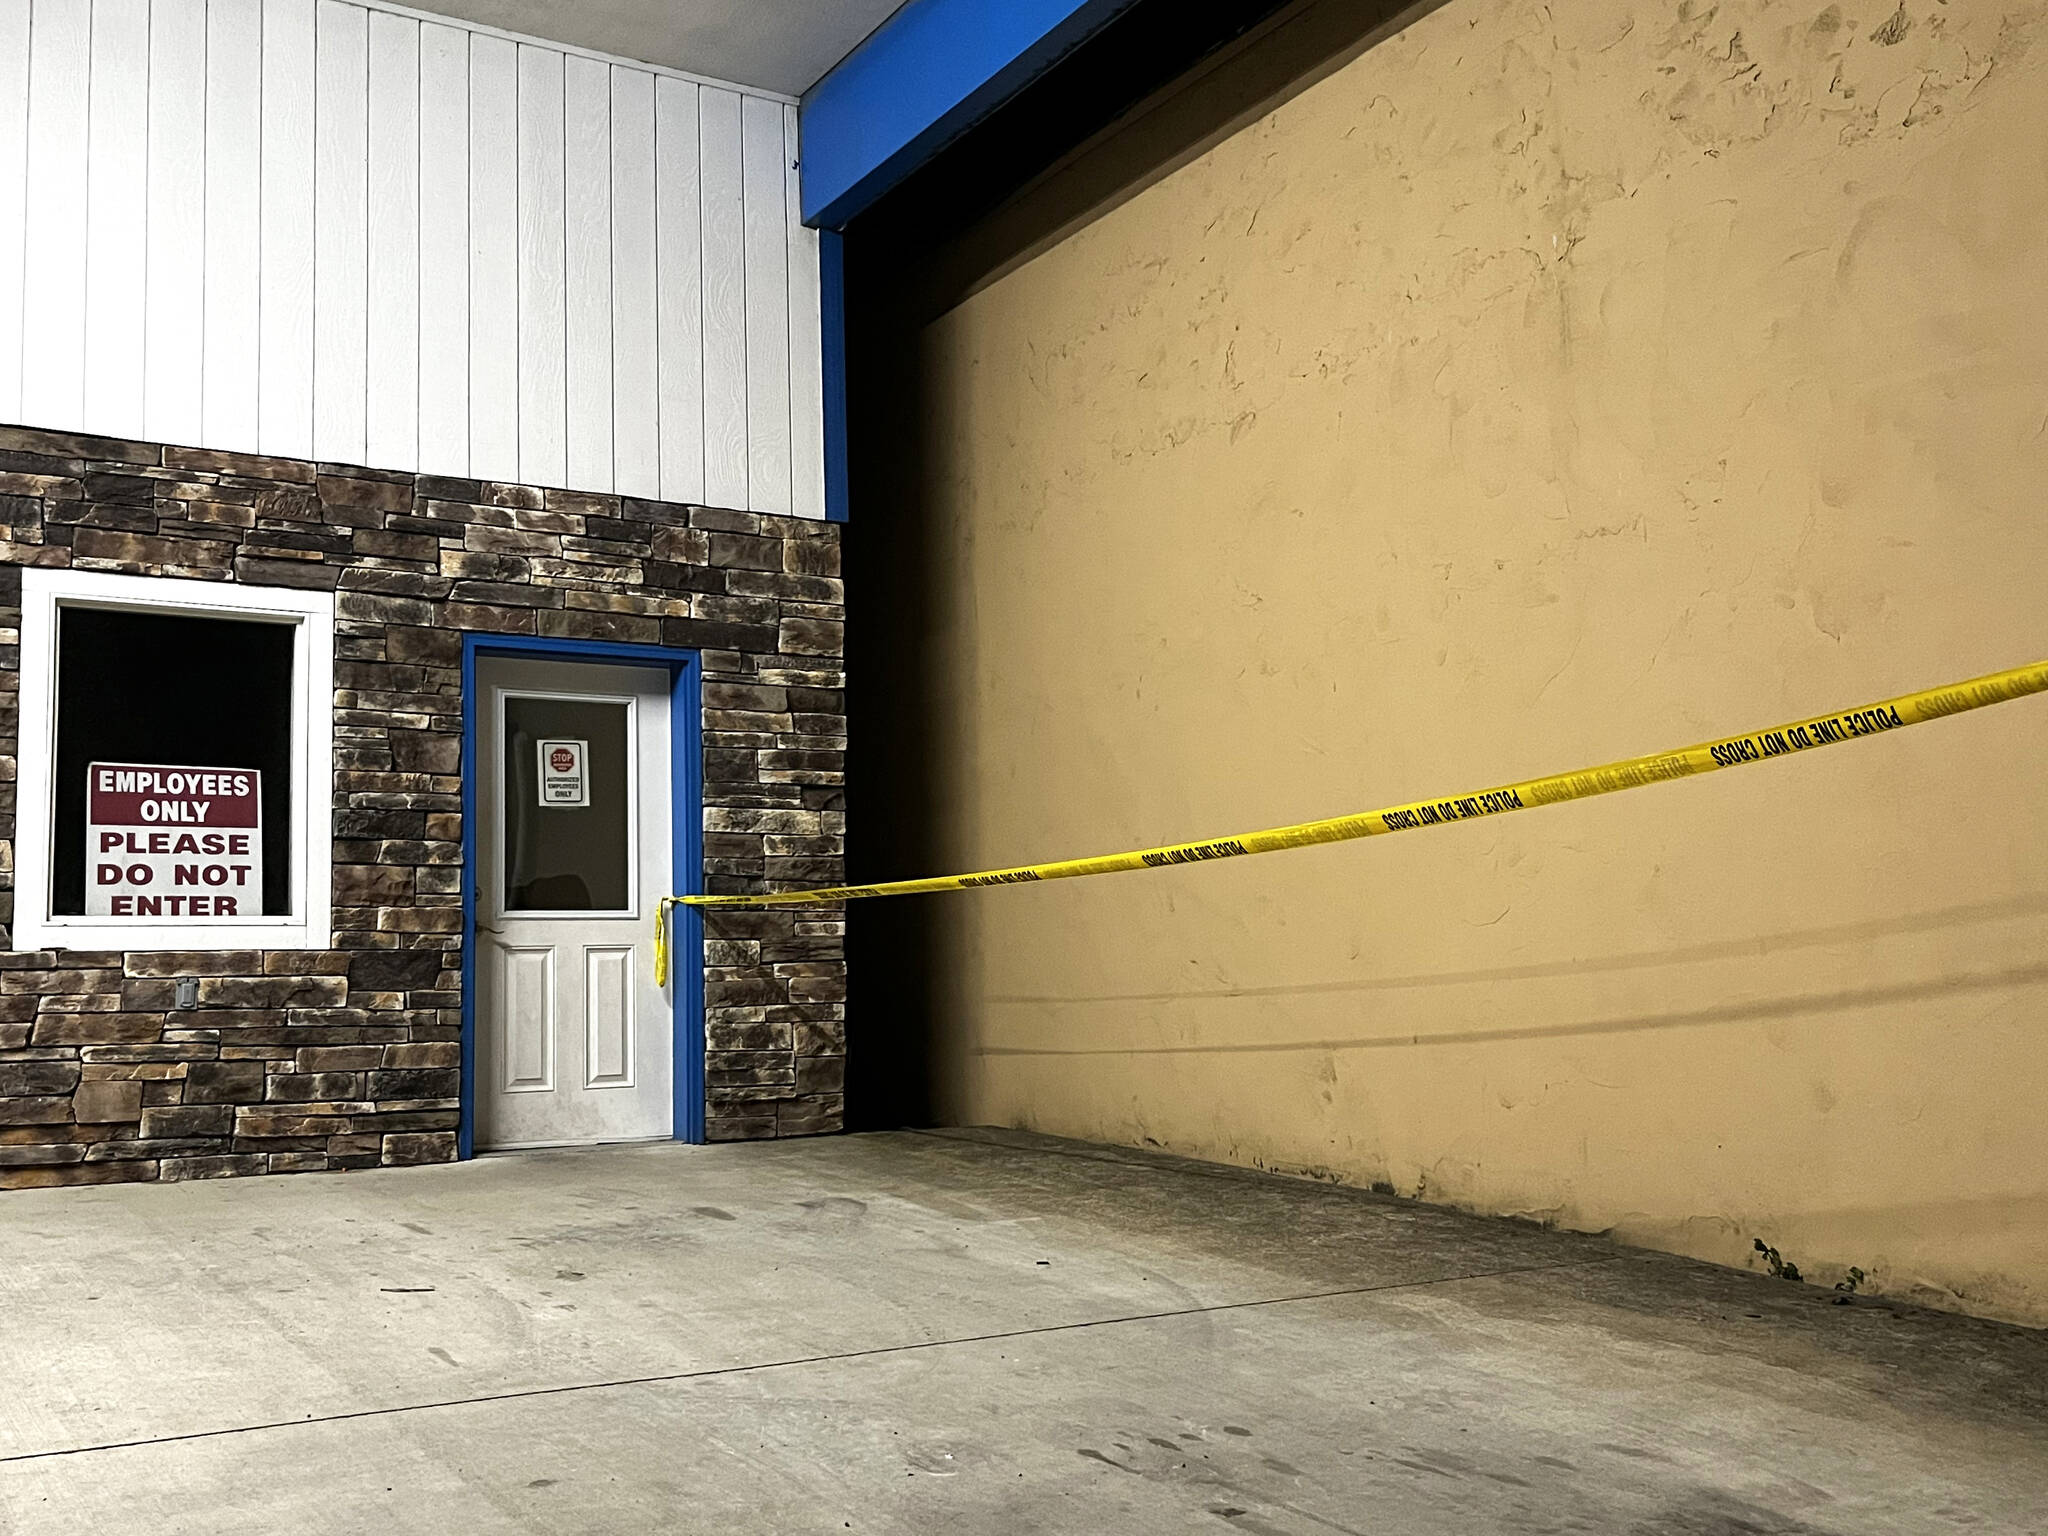 Allen Leister | The Daily World
                                The alleyway between Price & Price Real Estate and Whitney’s Auto Detail is closed off the public due to the investigation. The male body was found in a basement under the Price & Price Real Estate building on 120 W. Pioneer Ave., in Montesano.